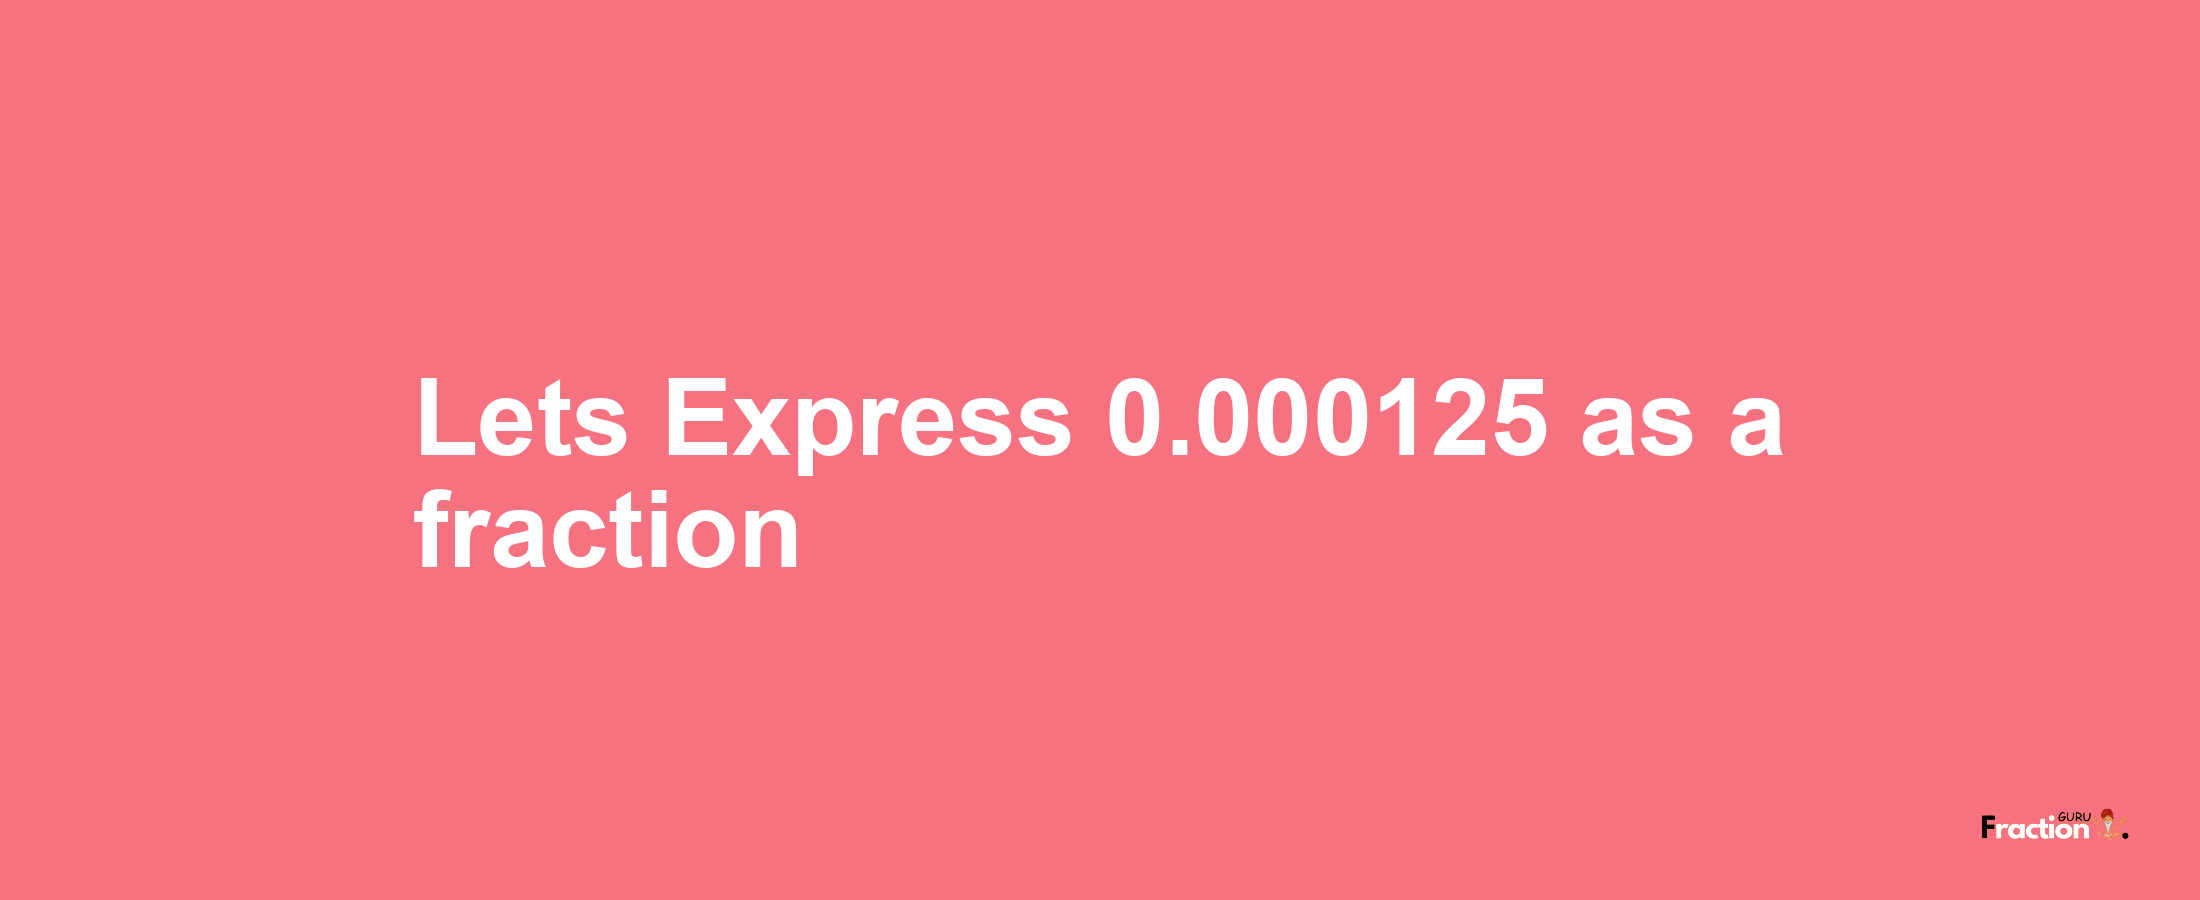 Lets Express 0.000125 as afraction